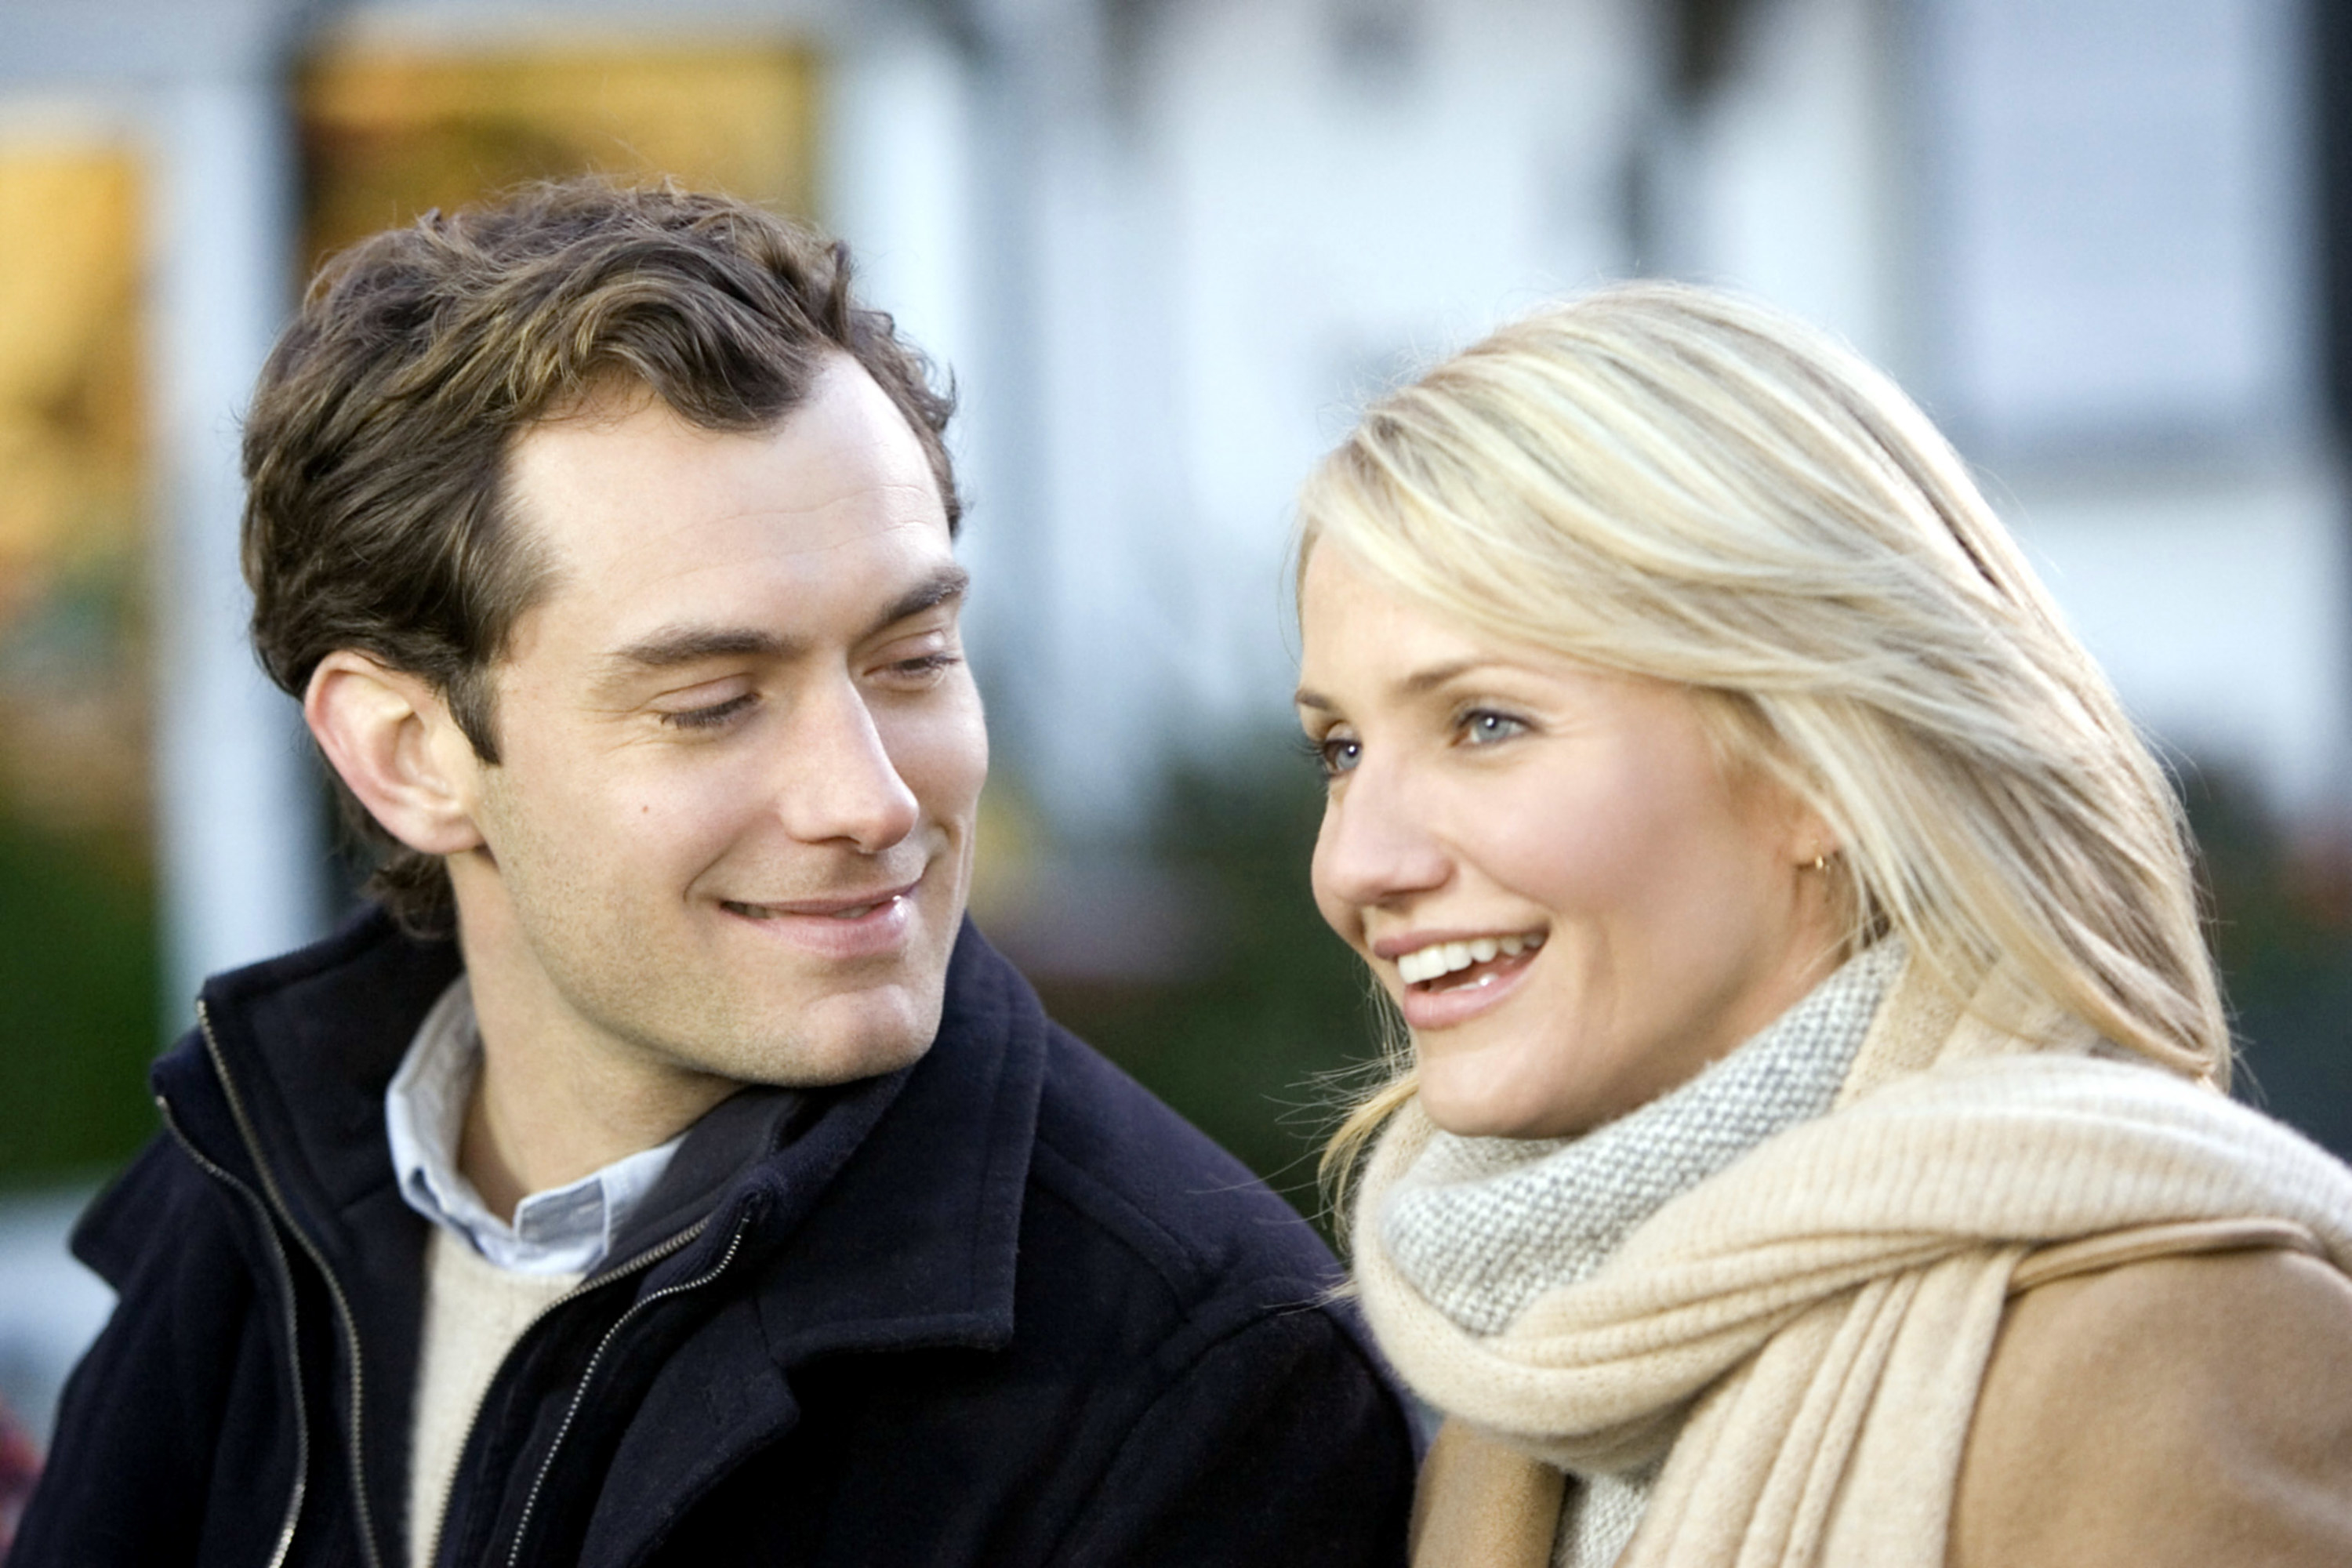 Still from The Holiday: Jude Law looks at Cameron Diaz with an affectionate smile